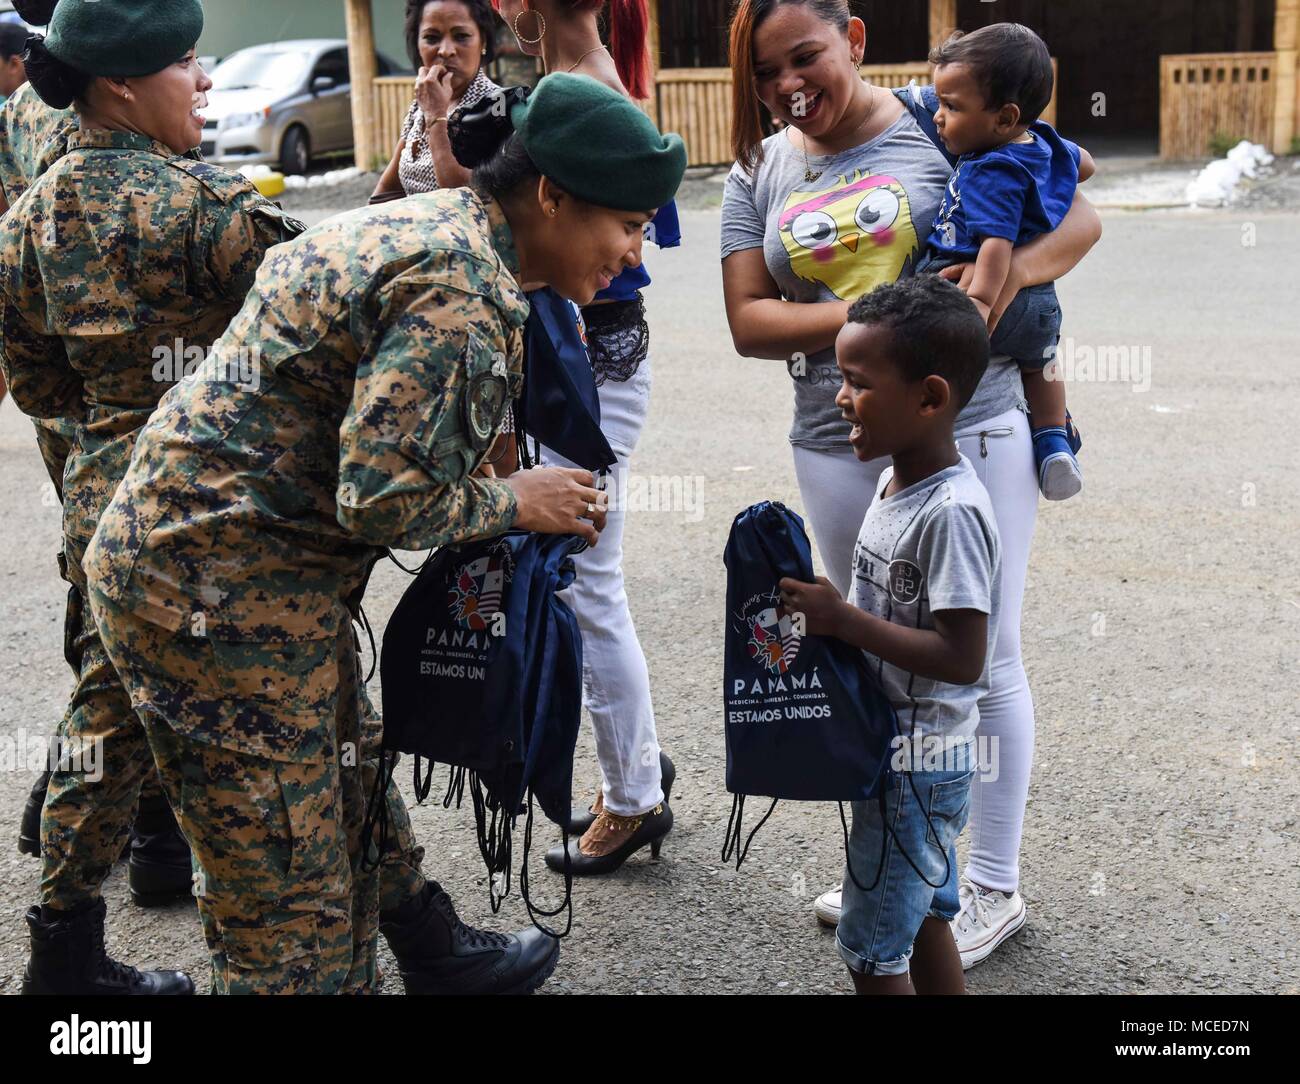 A member of the Panamanian National Border Service, known as SENAFRONT, passes bags out to children during the opening ceremony of Exercise New Horizons 2018, April 11, 2018, in Meteti, Panama. Exercise New Horizons is a joint-service training exercise, focused on enhancing relations with partner nations and providing aid to local communities while providing training U.S. military members. During the exercise, U.S. military members will build three schools, one community center and a women’s health ward in the Meteti area. They will also work closely with Panamanian health providers bringing m Stock Photo